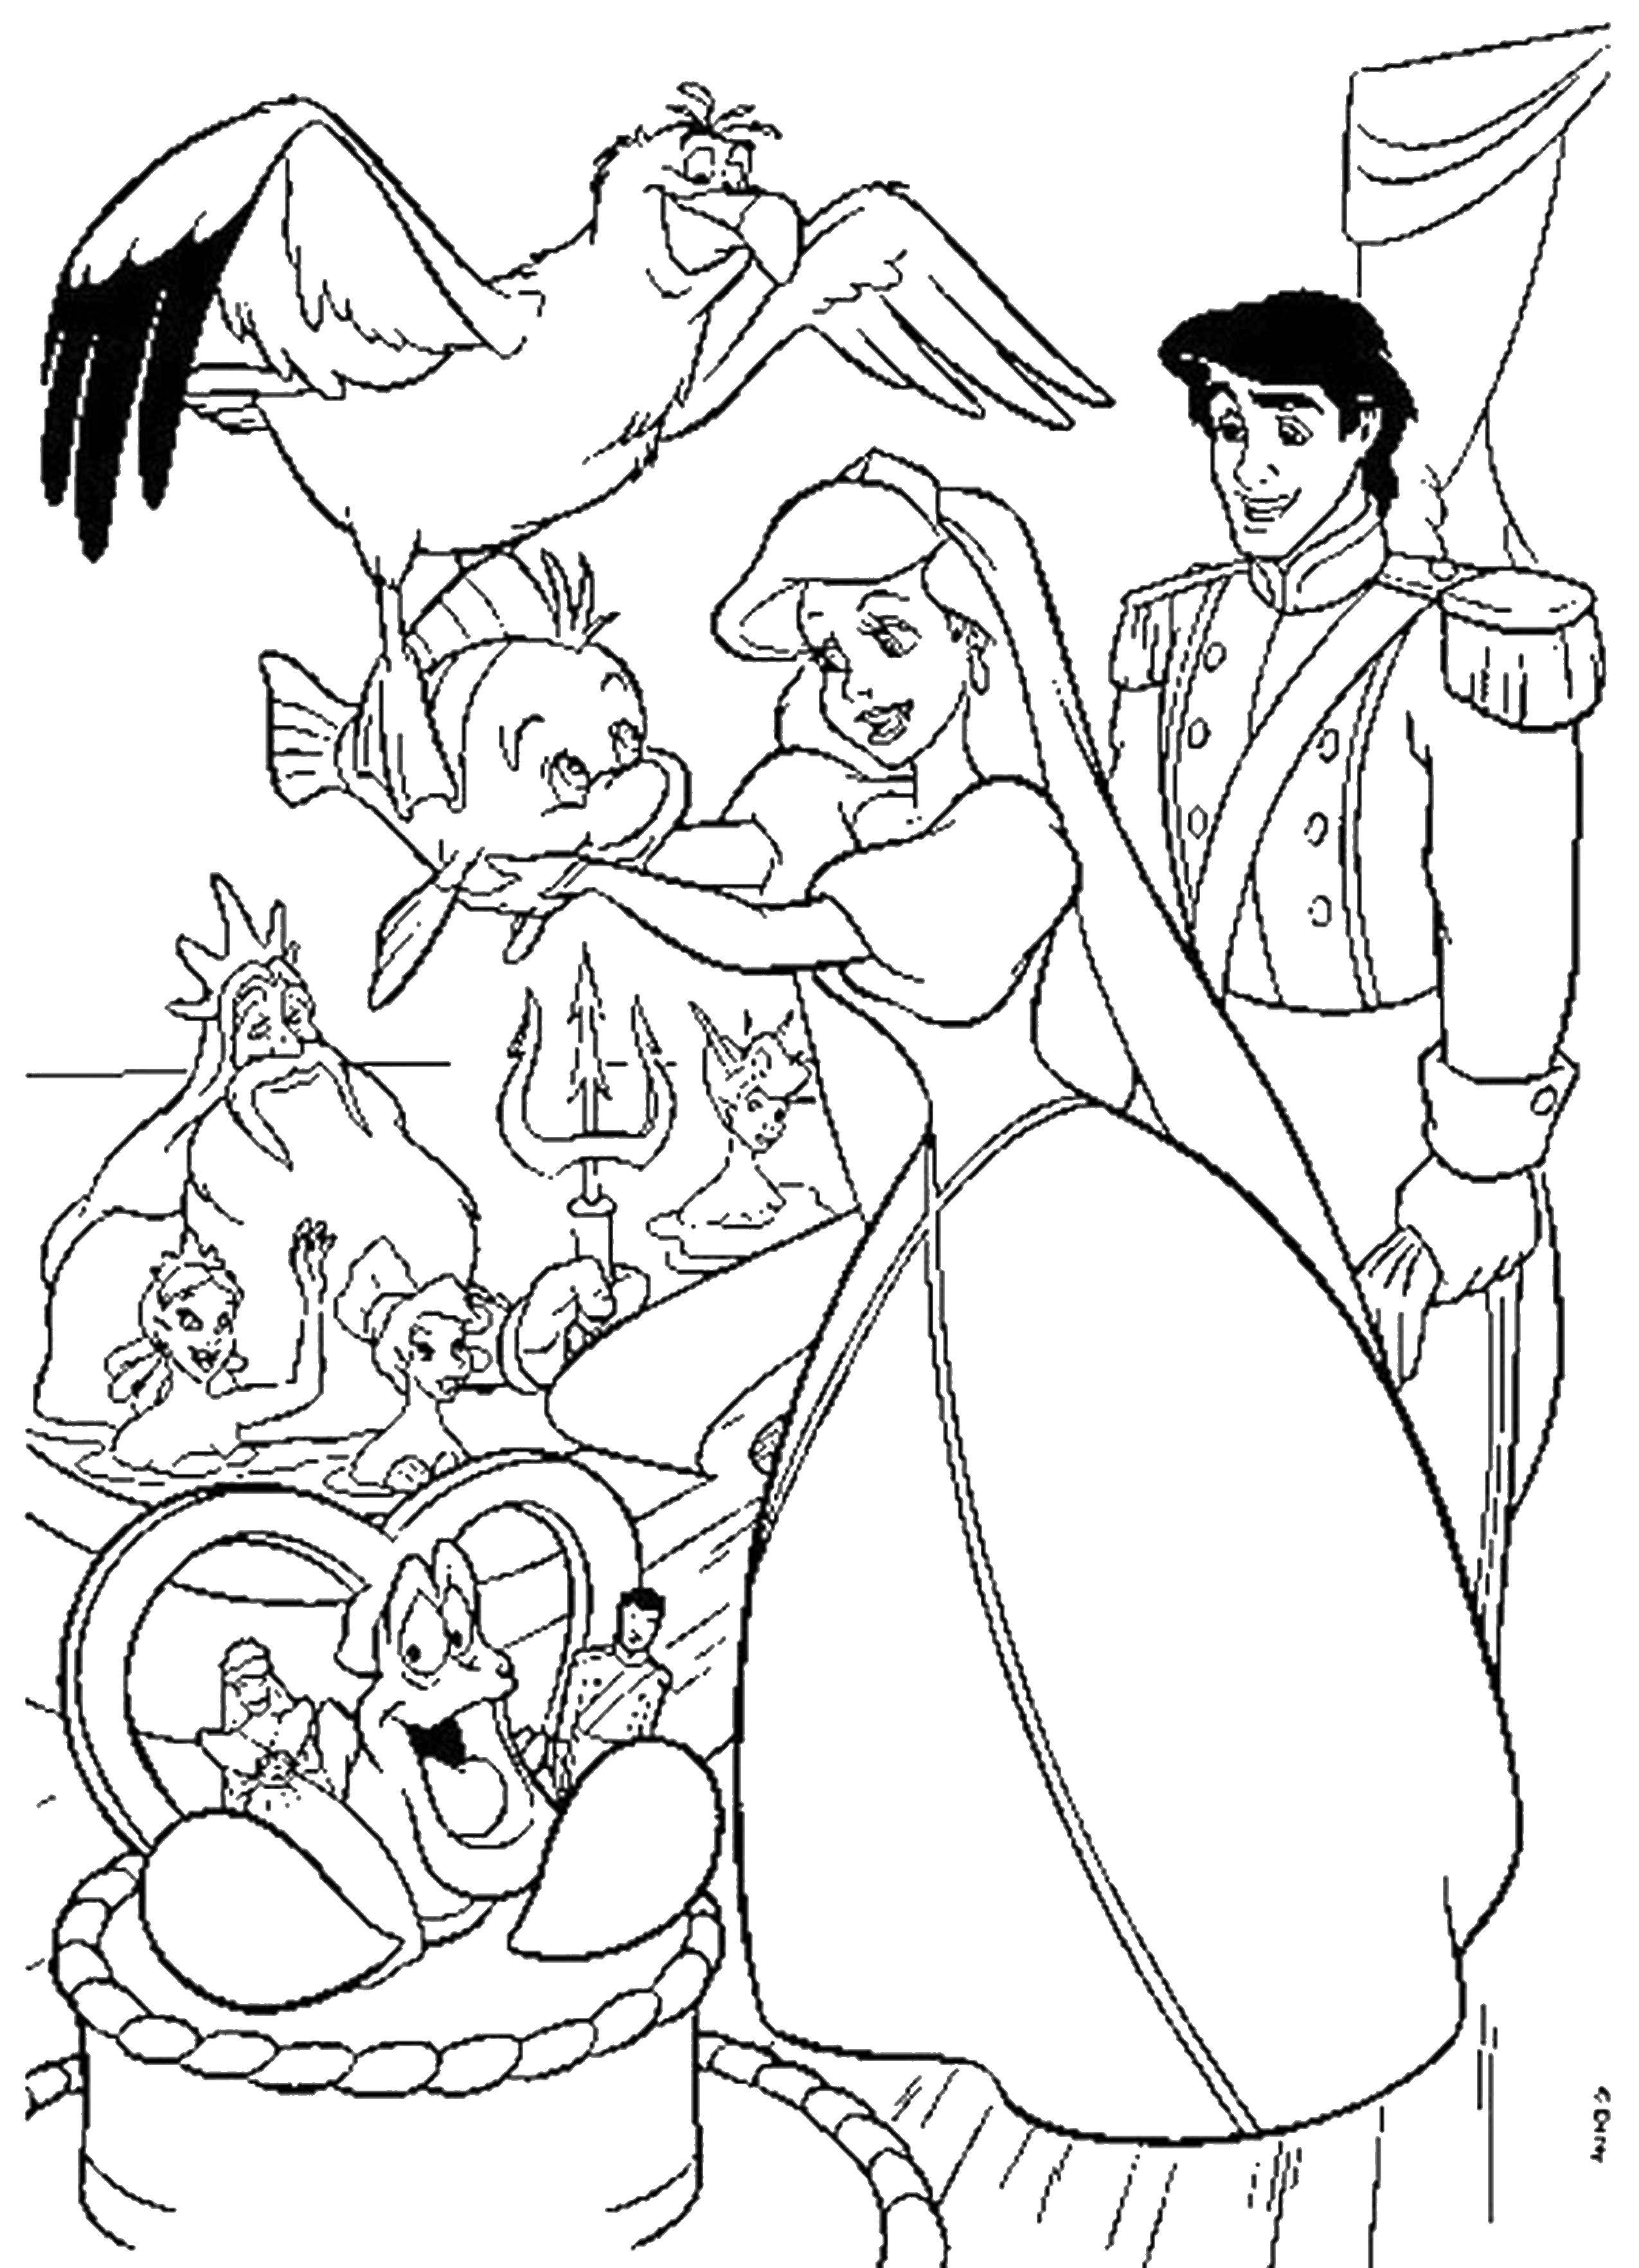 Coloring Ariel having fun with friends and loved ones. Category Disney coloring pages. Tags:  Disney, Cinderella.